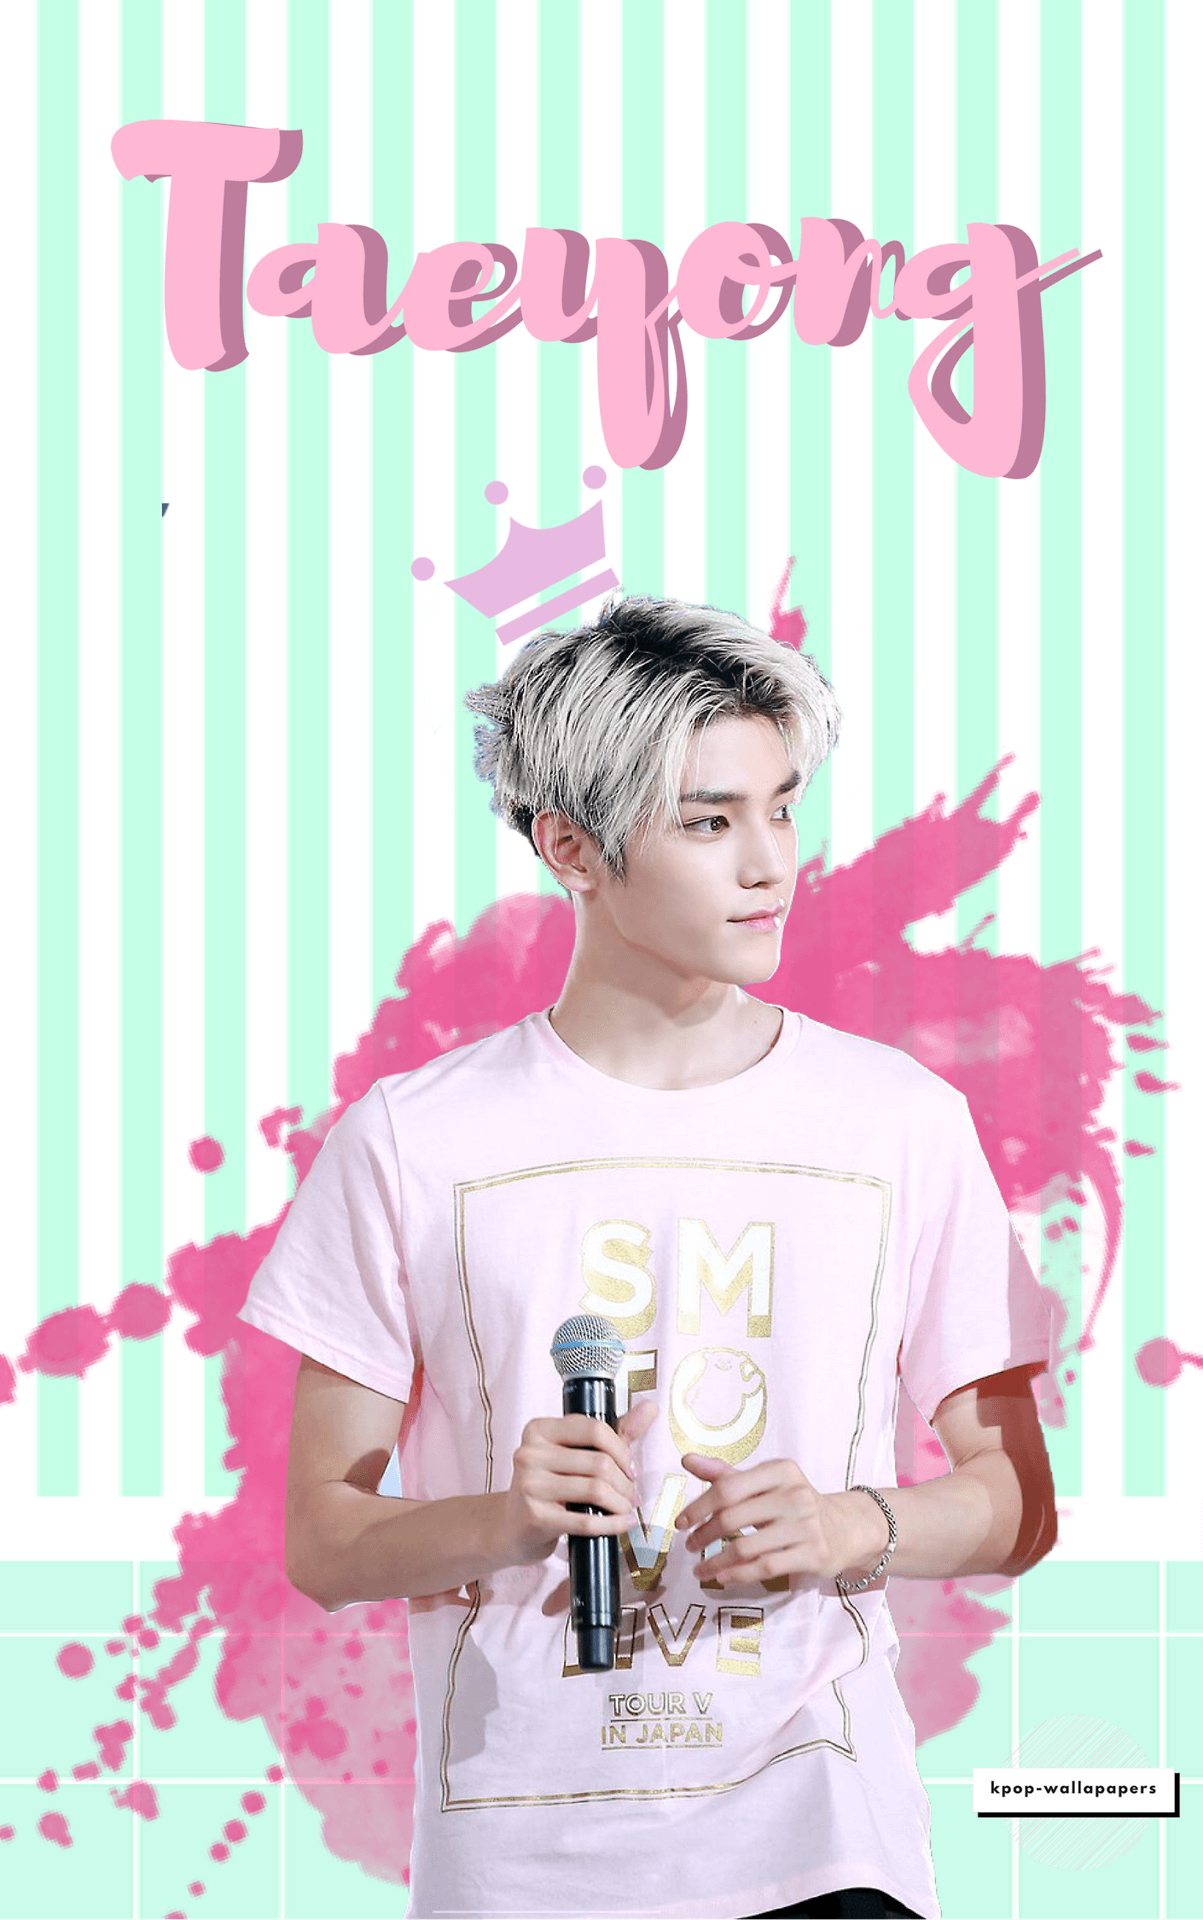 kpop wallpaper. Taeyong- NCT Here you go! I hope you'll like them